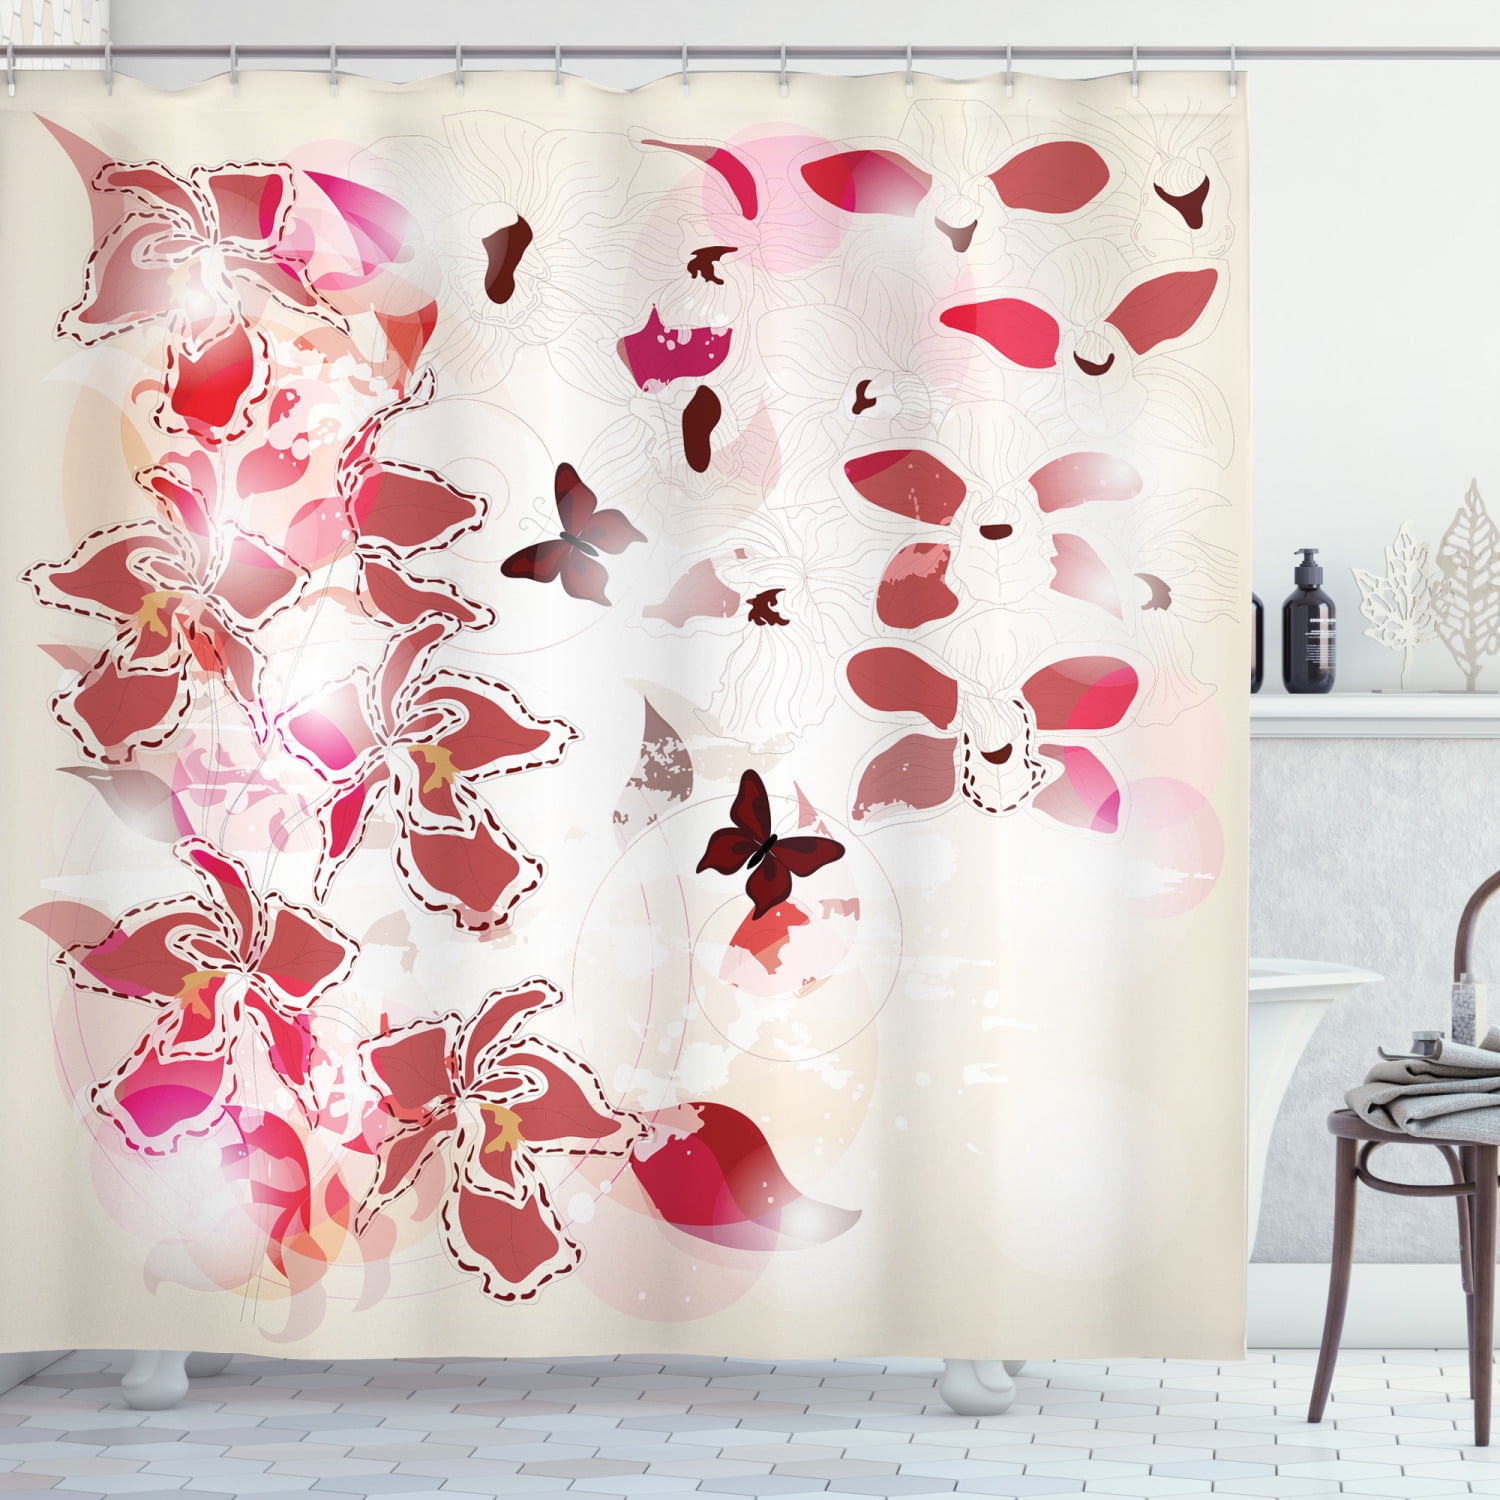 Fuchsia Shower Curtain, Orchids Butterflies Digital Watercolor Spring  Tropical Blooms, Fabric Bathroom Set with Hooks, 69W X 84L Inches Extra  Long, Eggshell Pink and Dark Fuchsia, by Ambesonne 